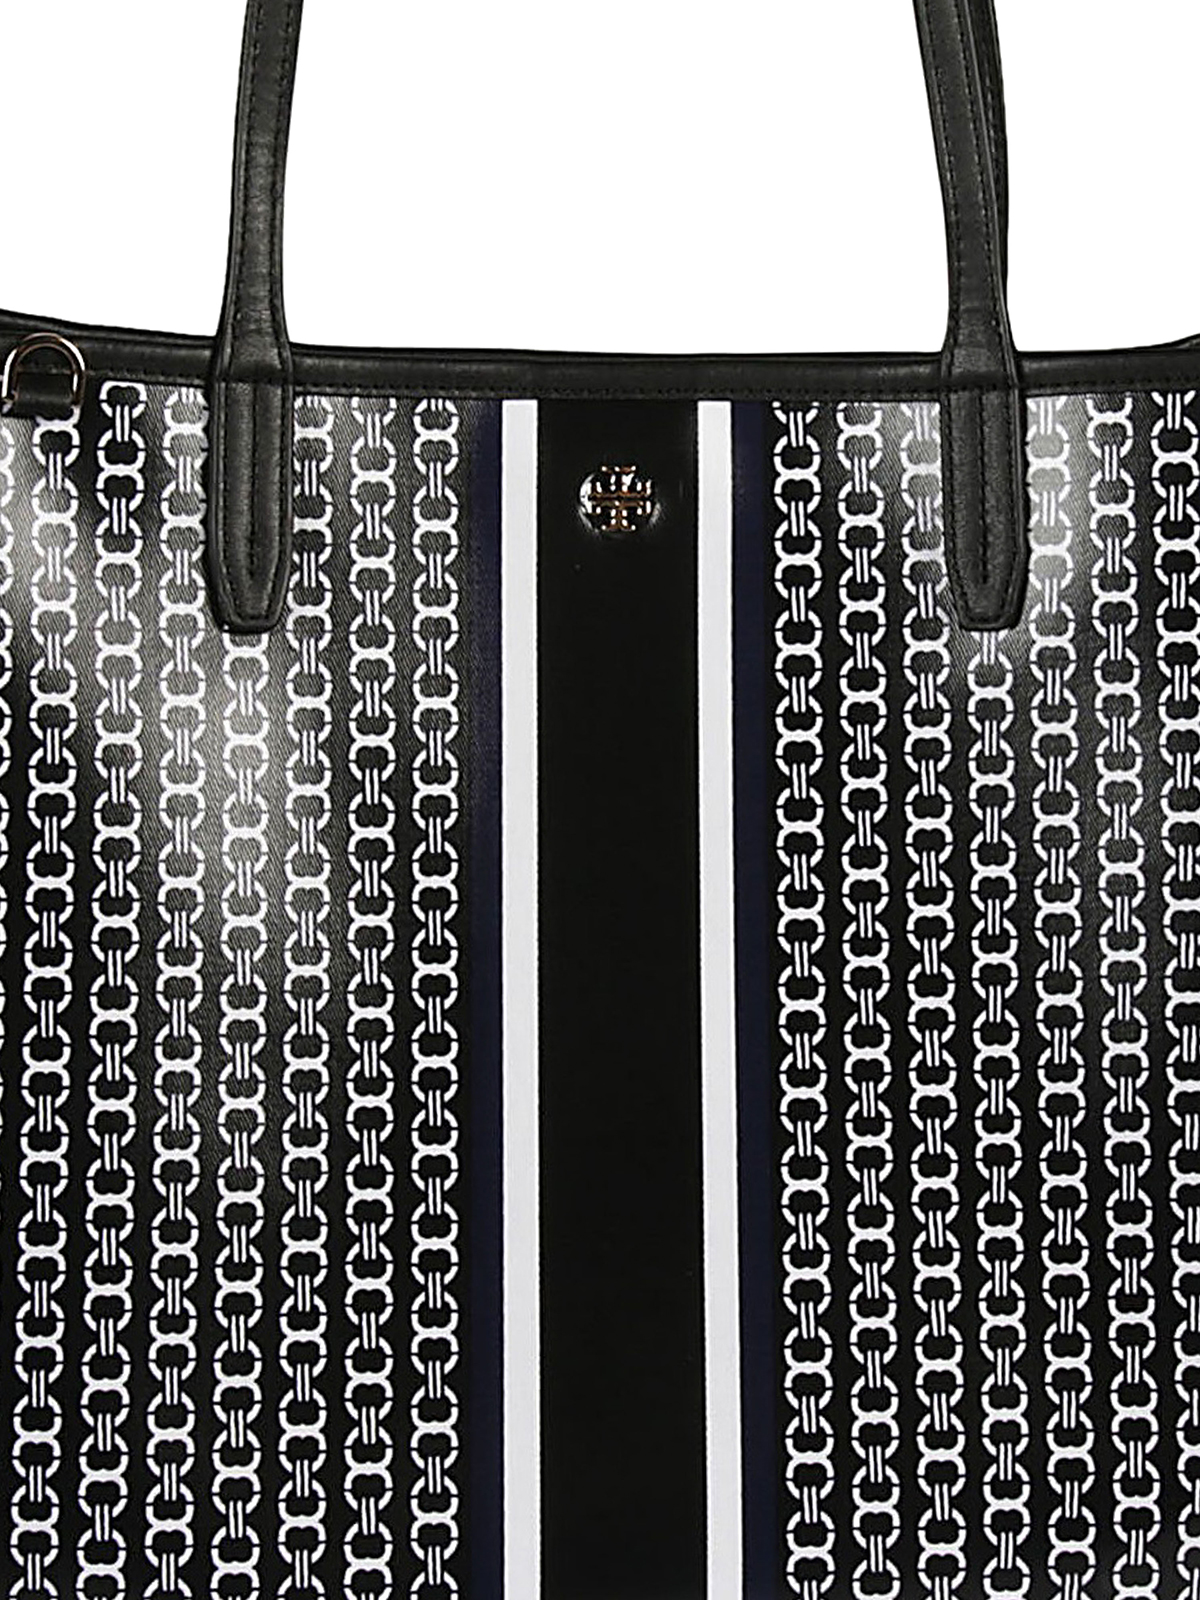 Tory Burch Gemini Link Canvas Patches Tote in White